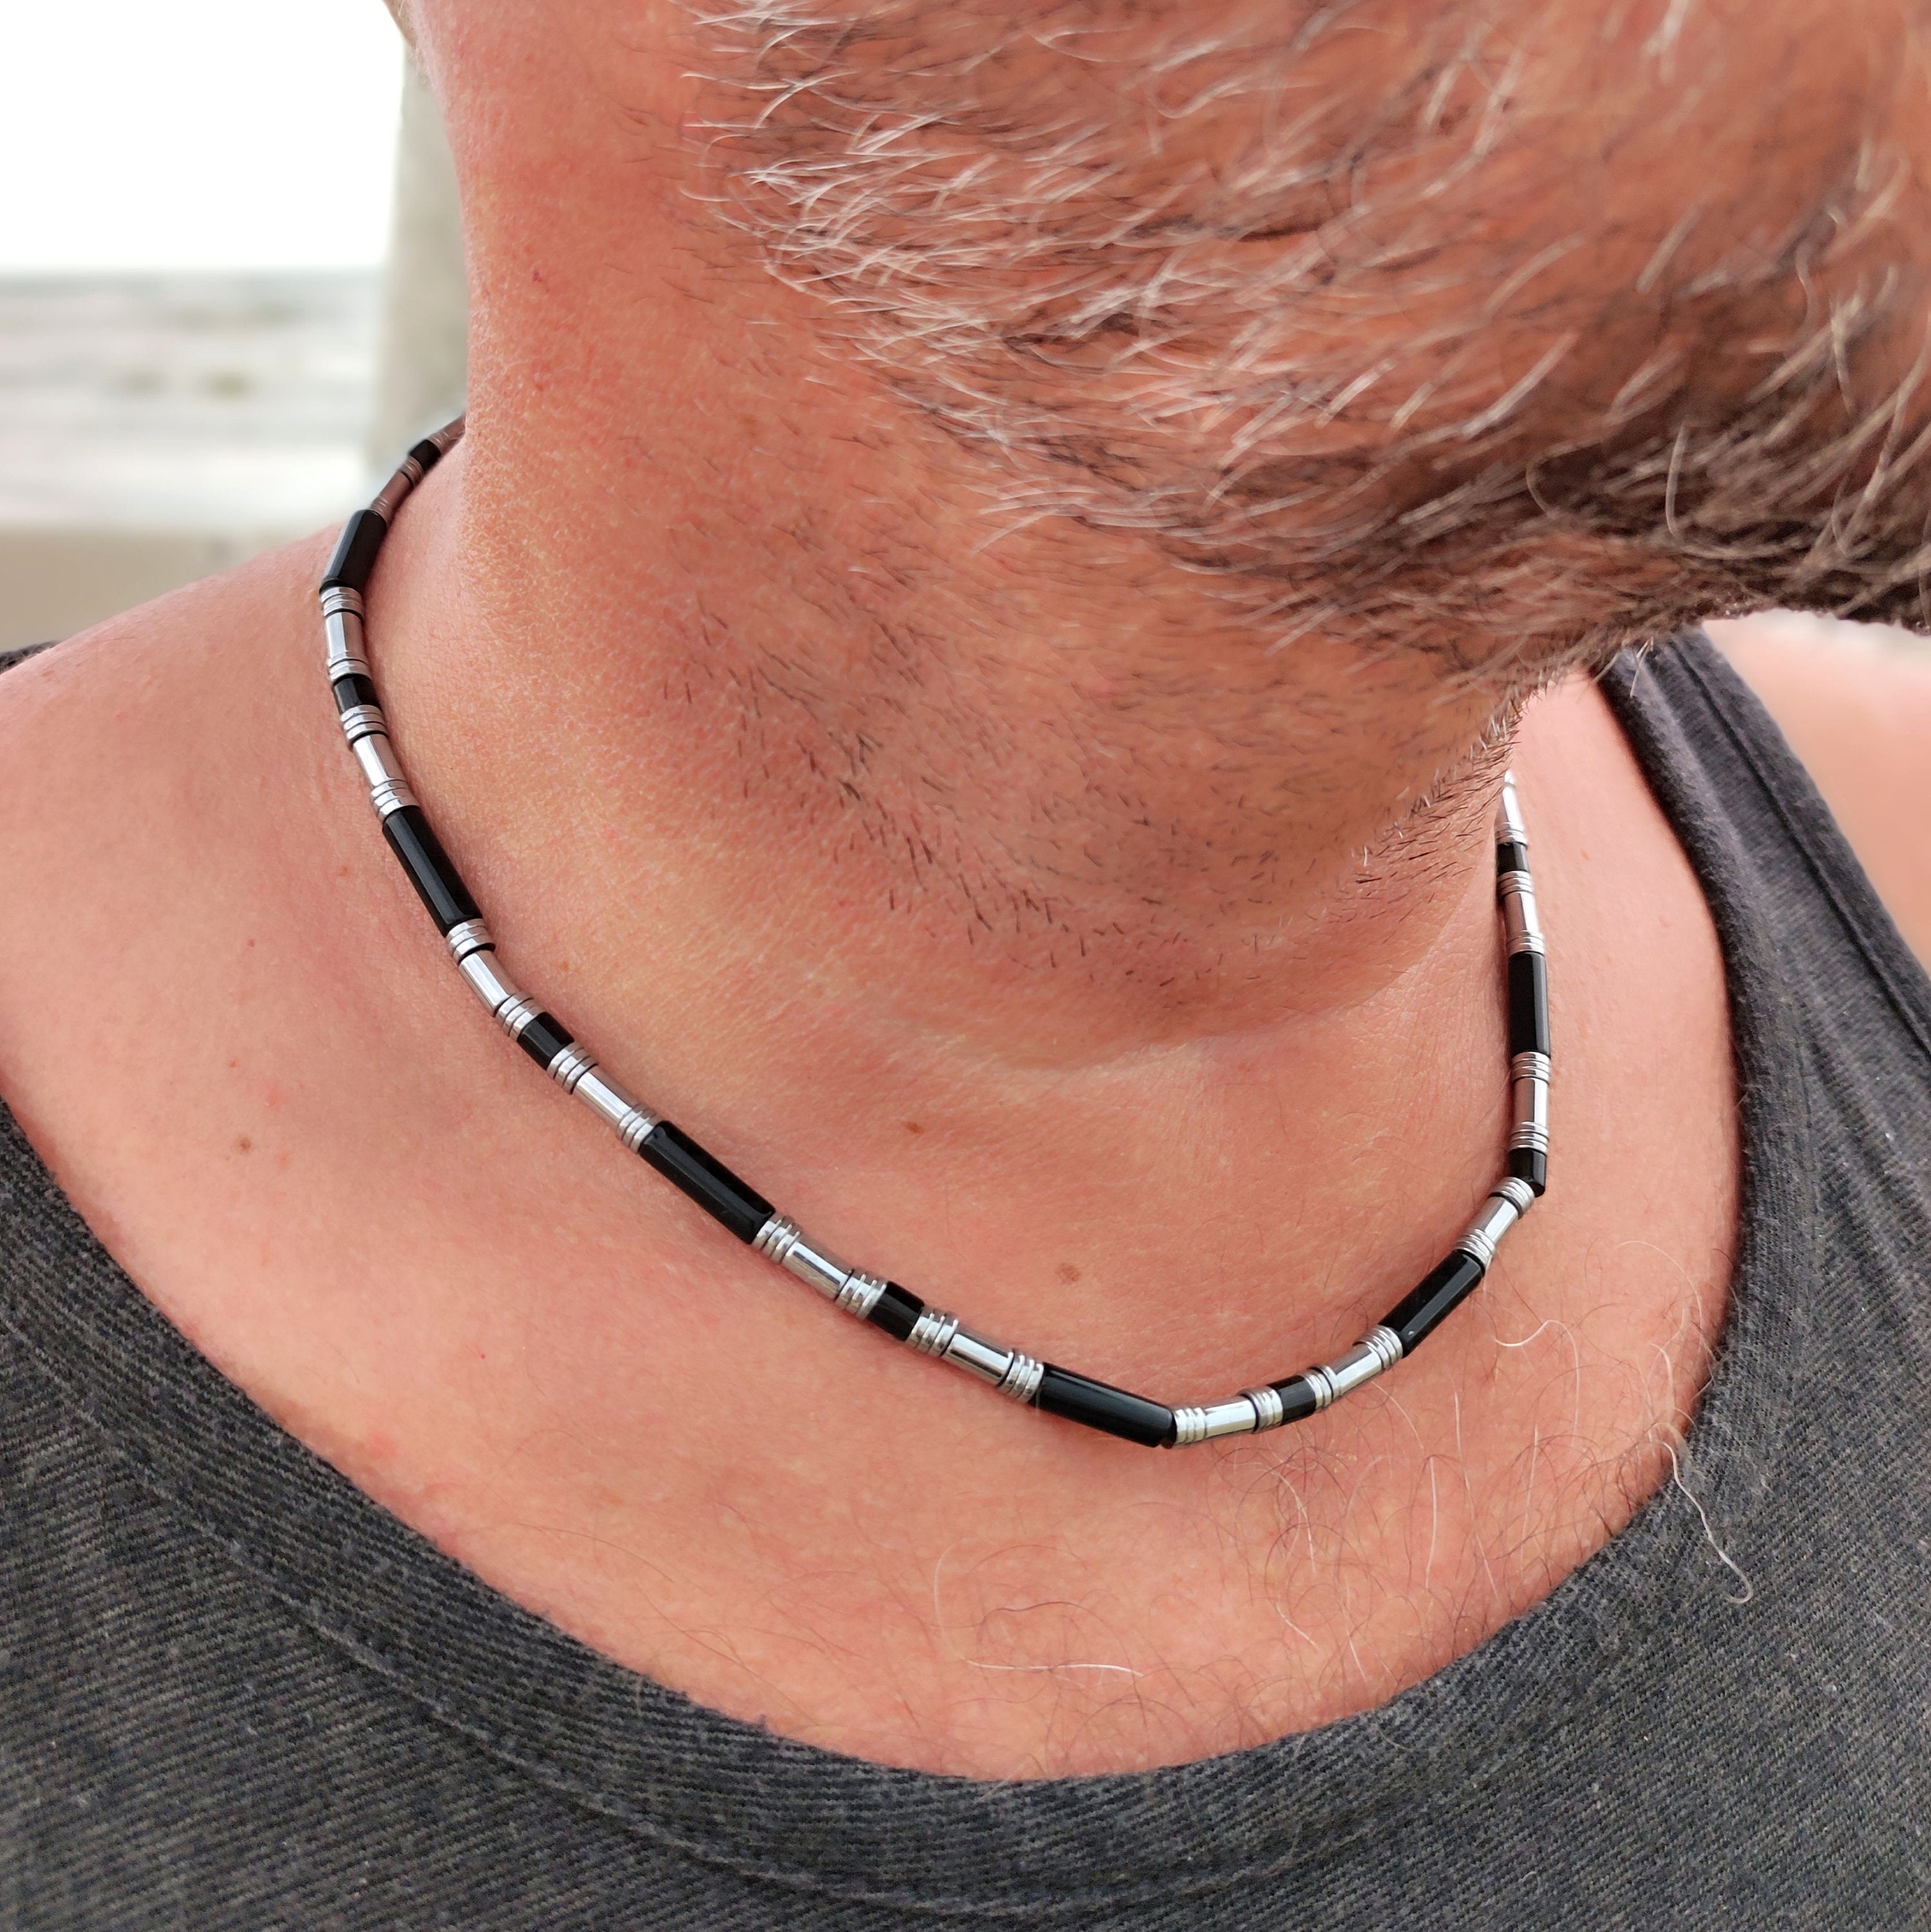 Amazon.com: Accents Kingdom Men's Hematite Therapy & Healing Stone with  Tiger's Eye Bead Necklace, 18